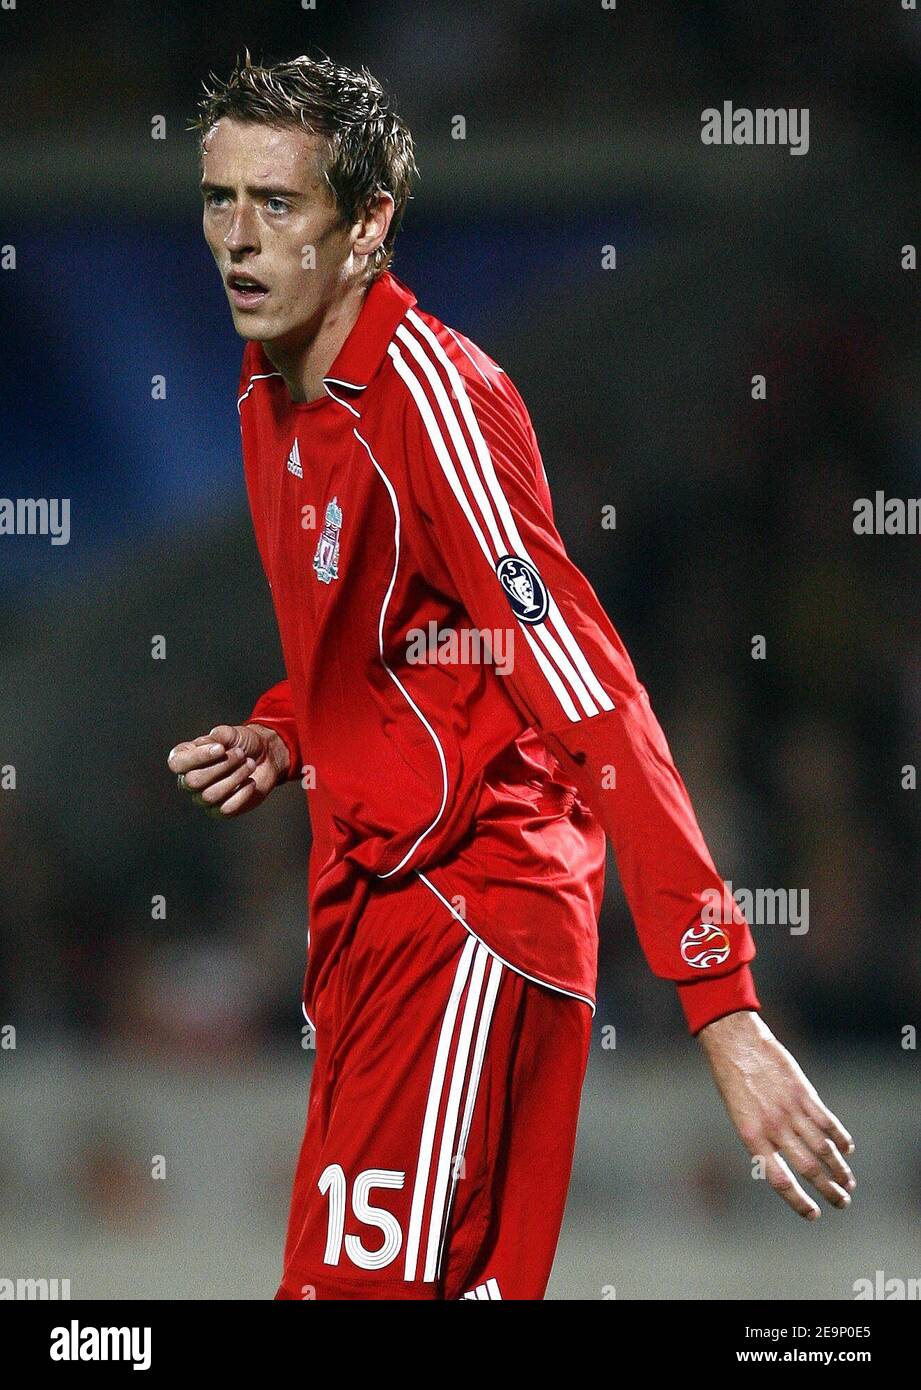 Liverpool's Peter Crouch during the UEFA Champions League, Group C, Girondins de Bordeaux vs Liverpool FC at the Stade Chaban-Delmas in Bordeaux, France on October 18, 2006. Liverpool won 1-0. Photo by Christian Liewig/ABACAPRESS.COM Stock Photo